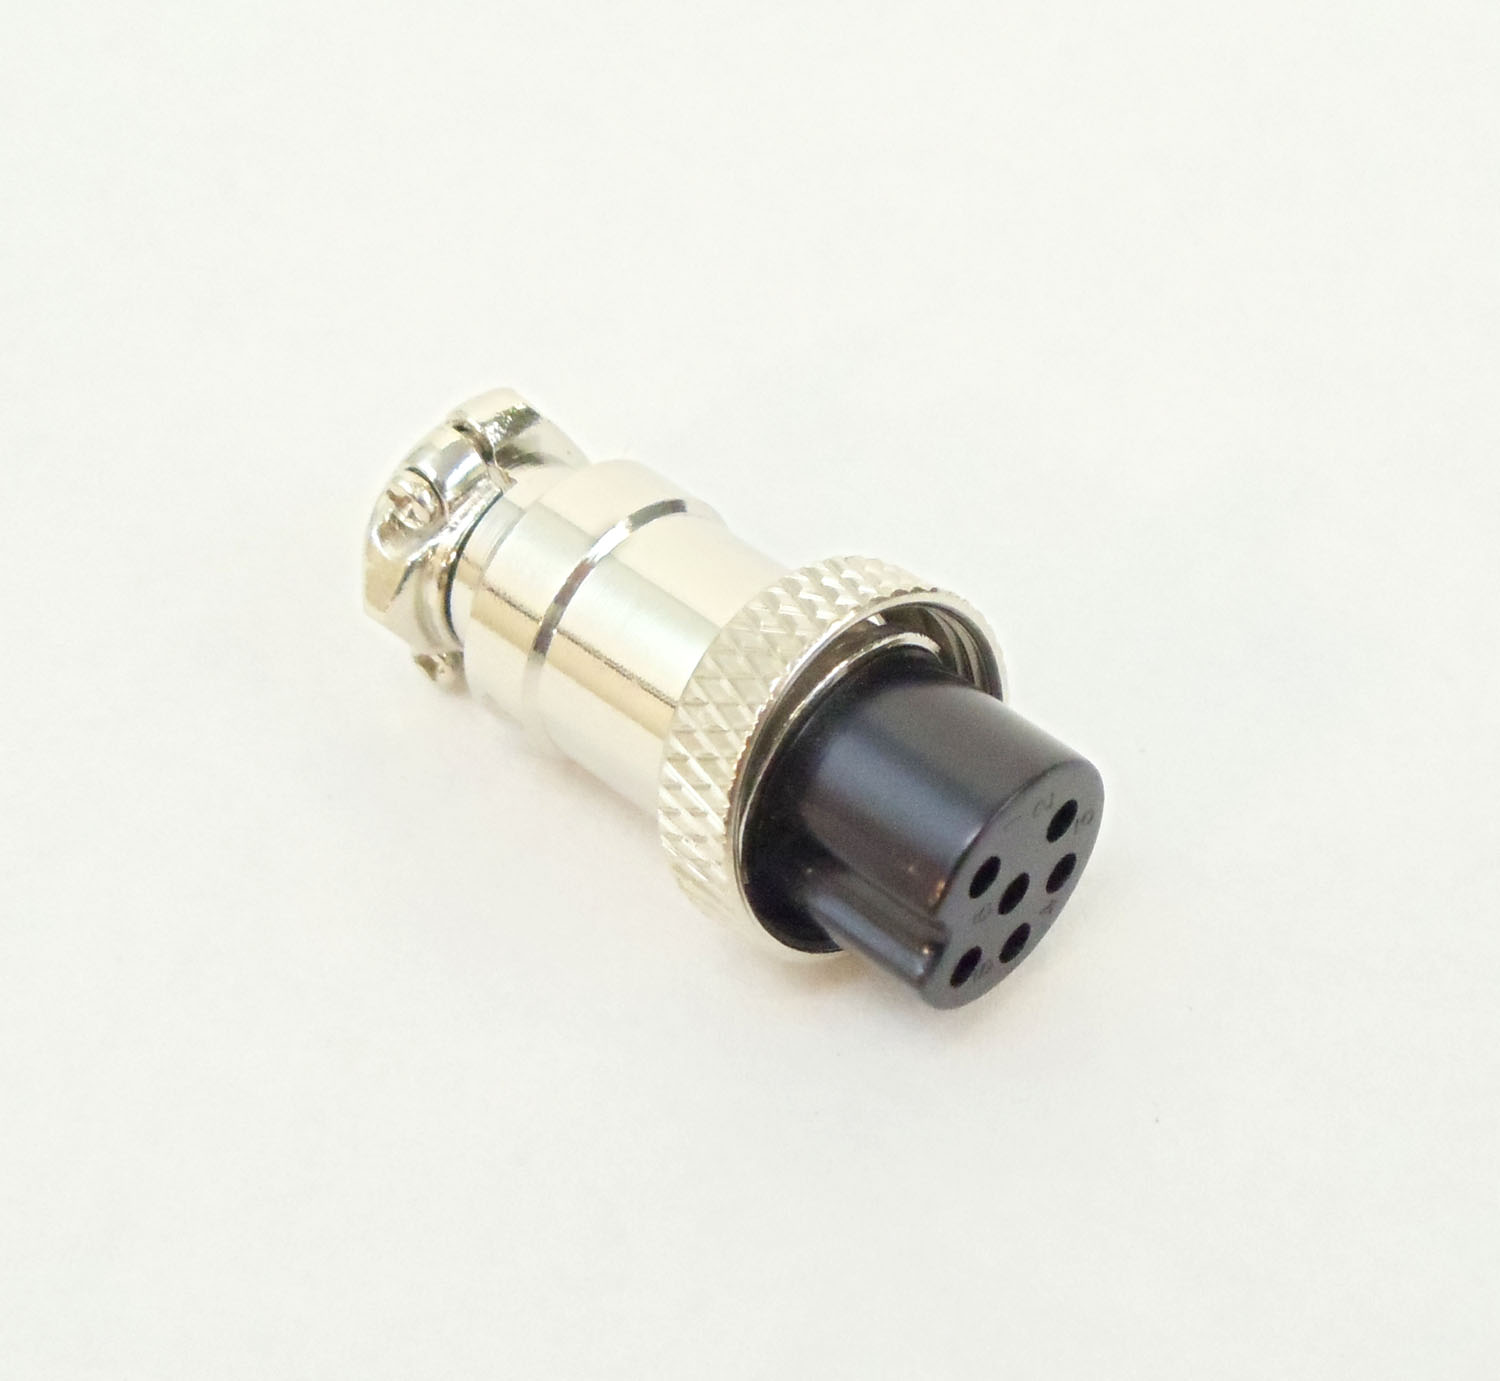 Ranger Communications - 6 Pin Microphone Connector For Rci-2950 Microphone & Other Microphone Brands